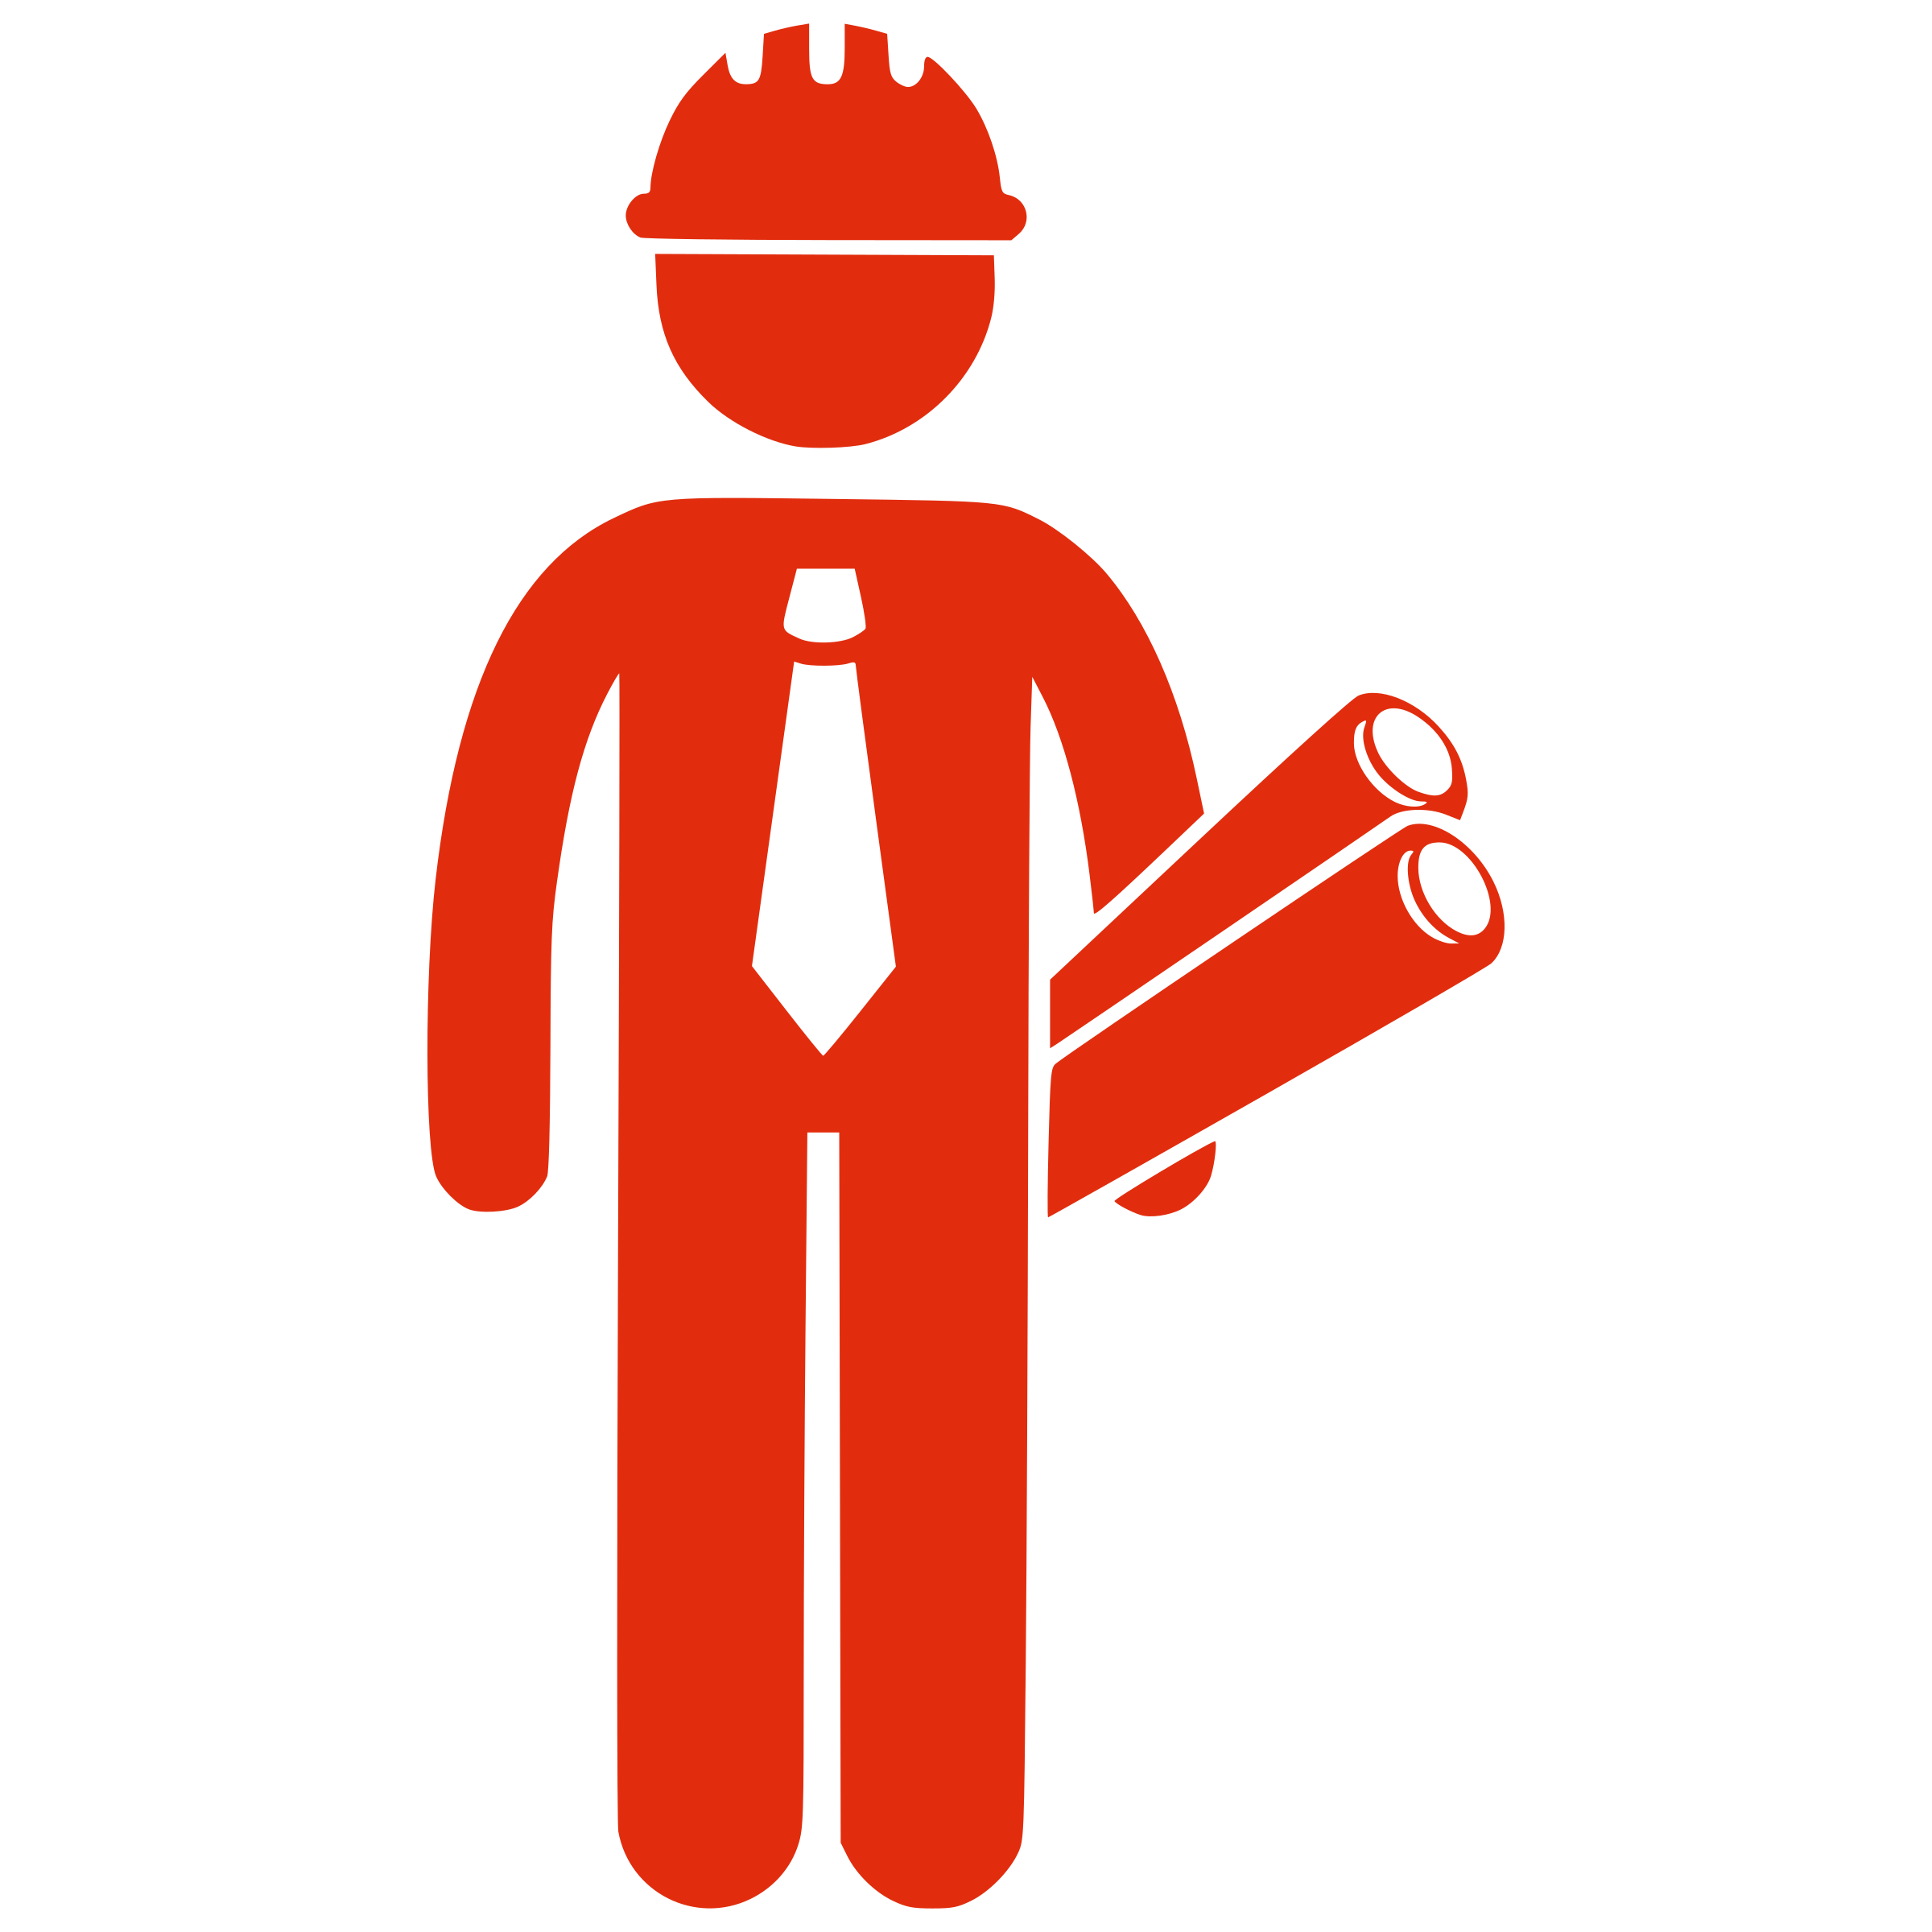 manager clipart silhouette